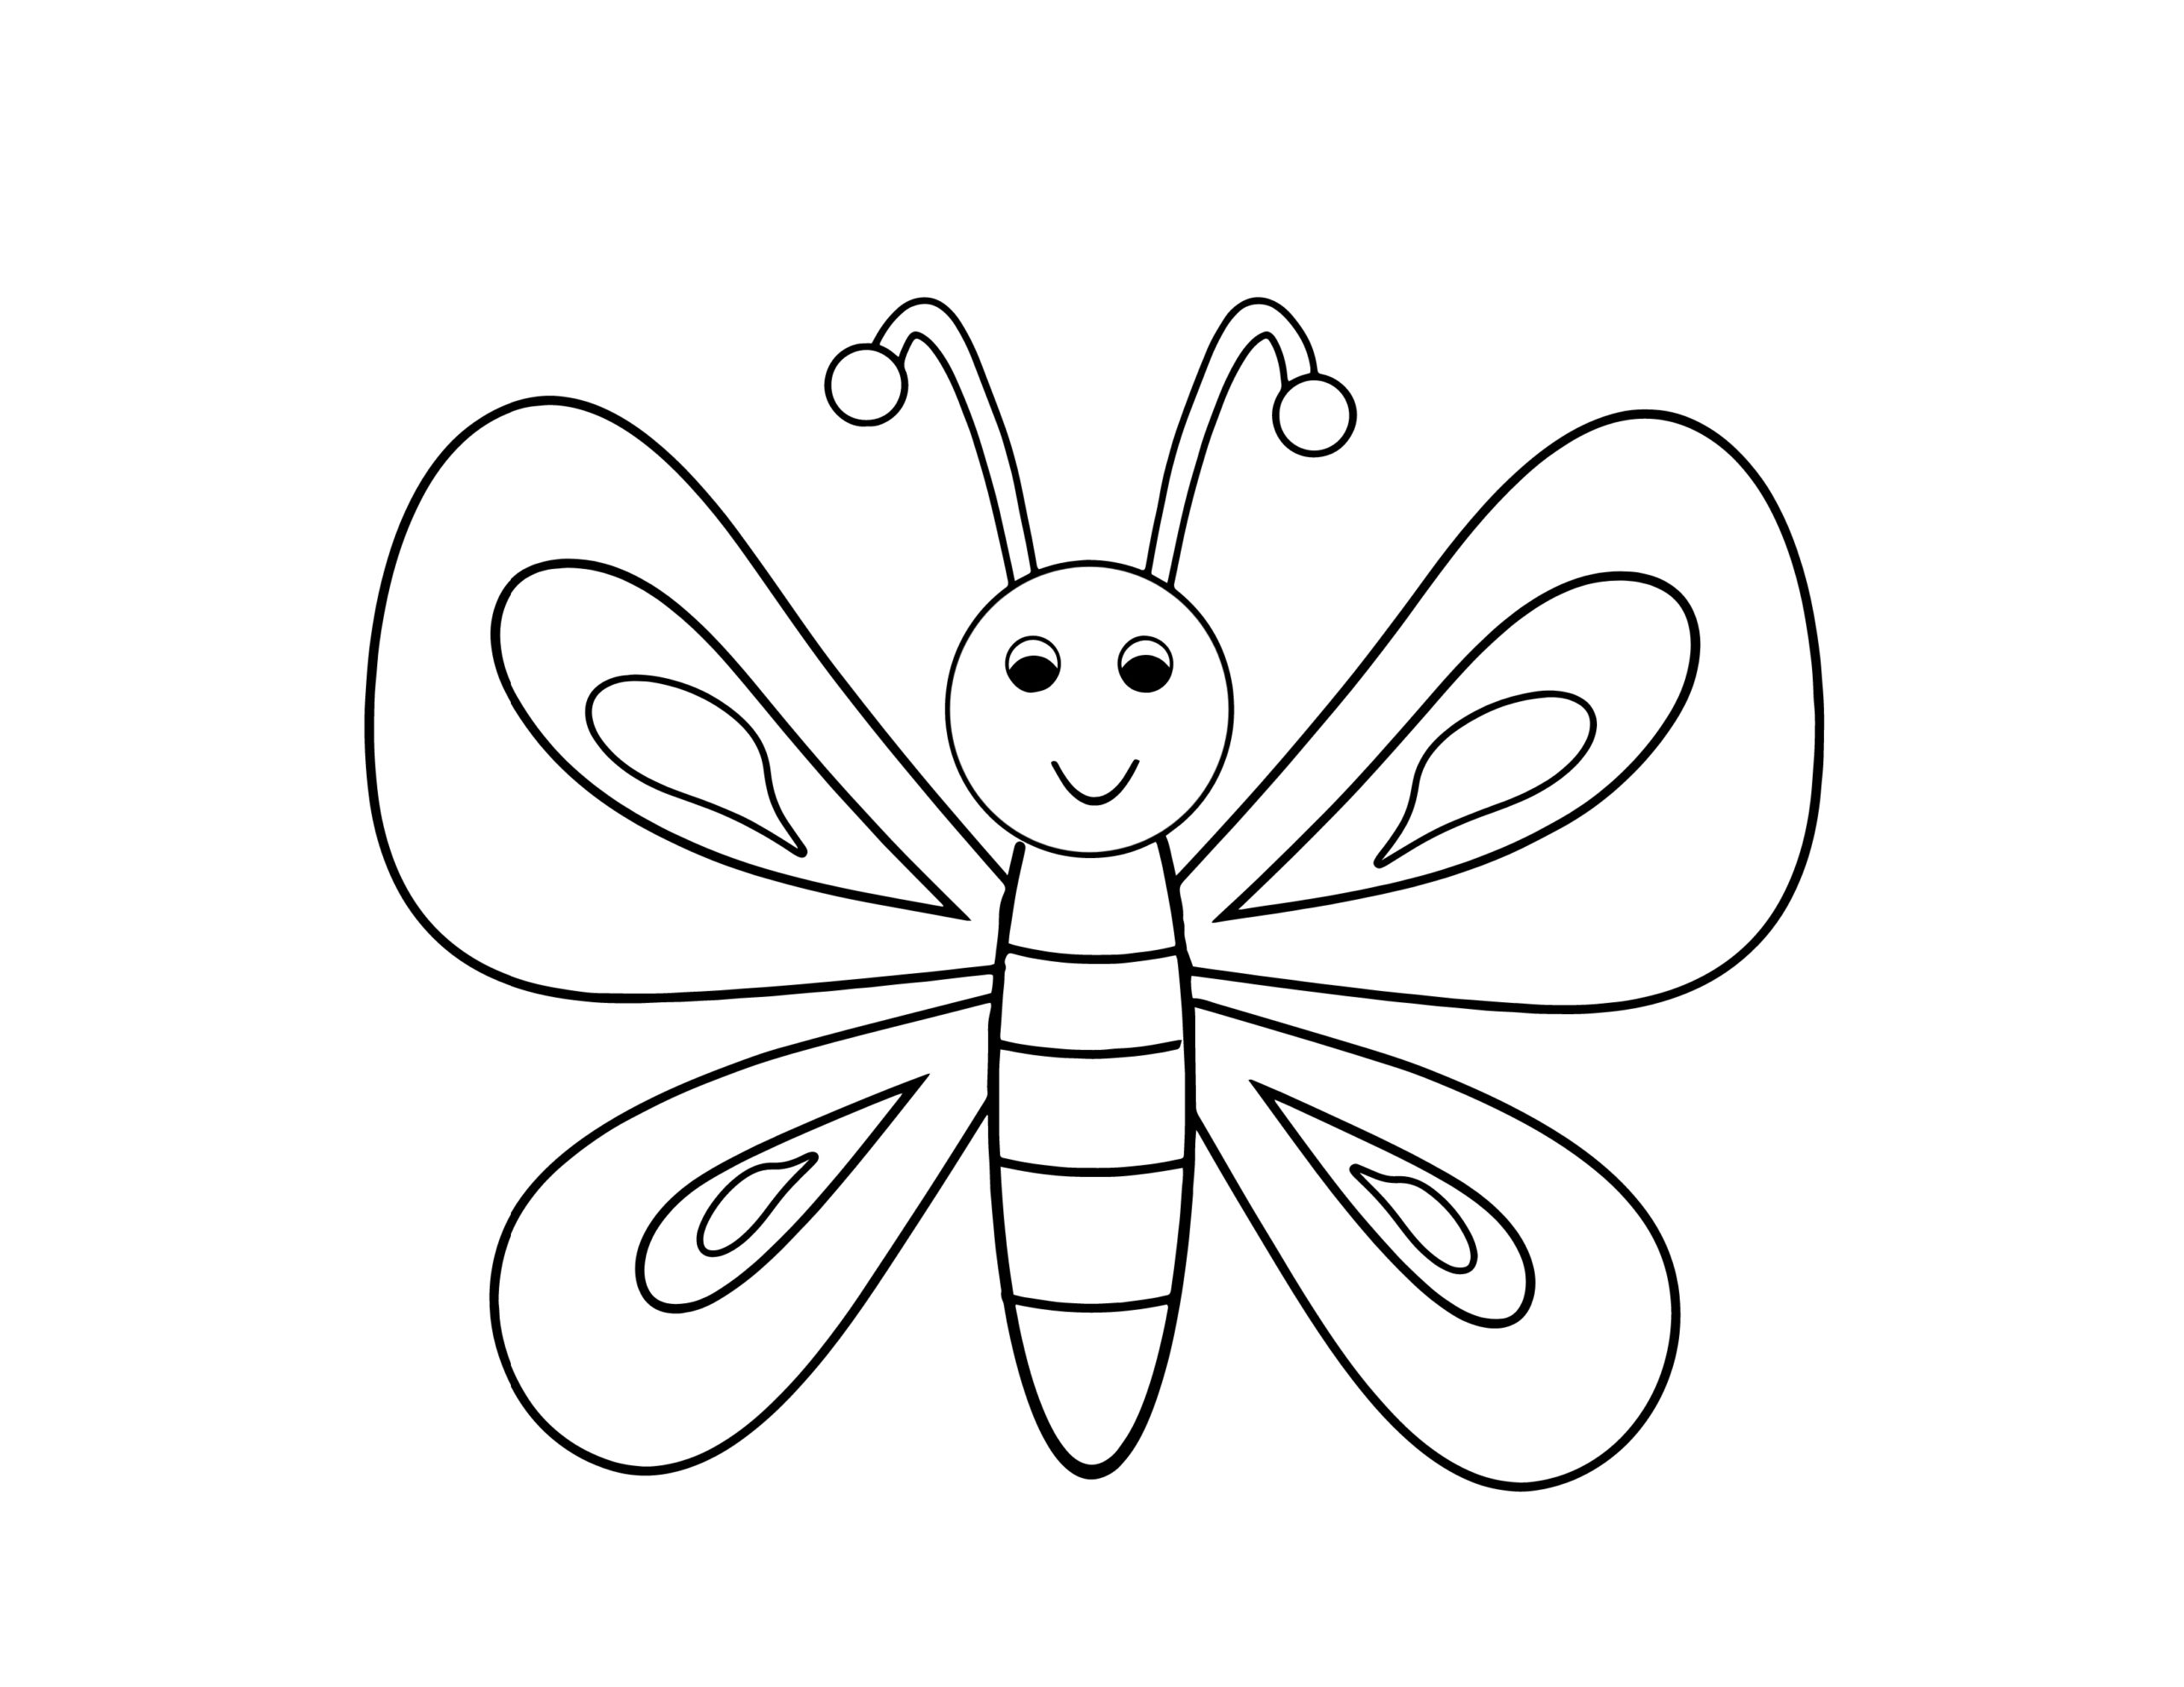 Butterfly in spring coloring page free printable no you need to calm down